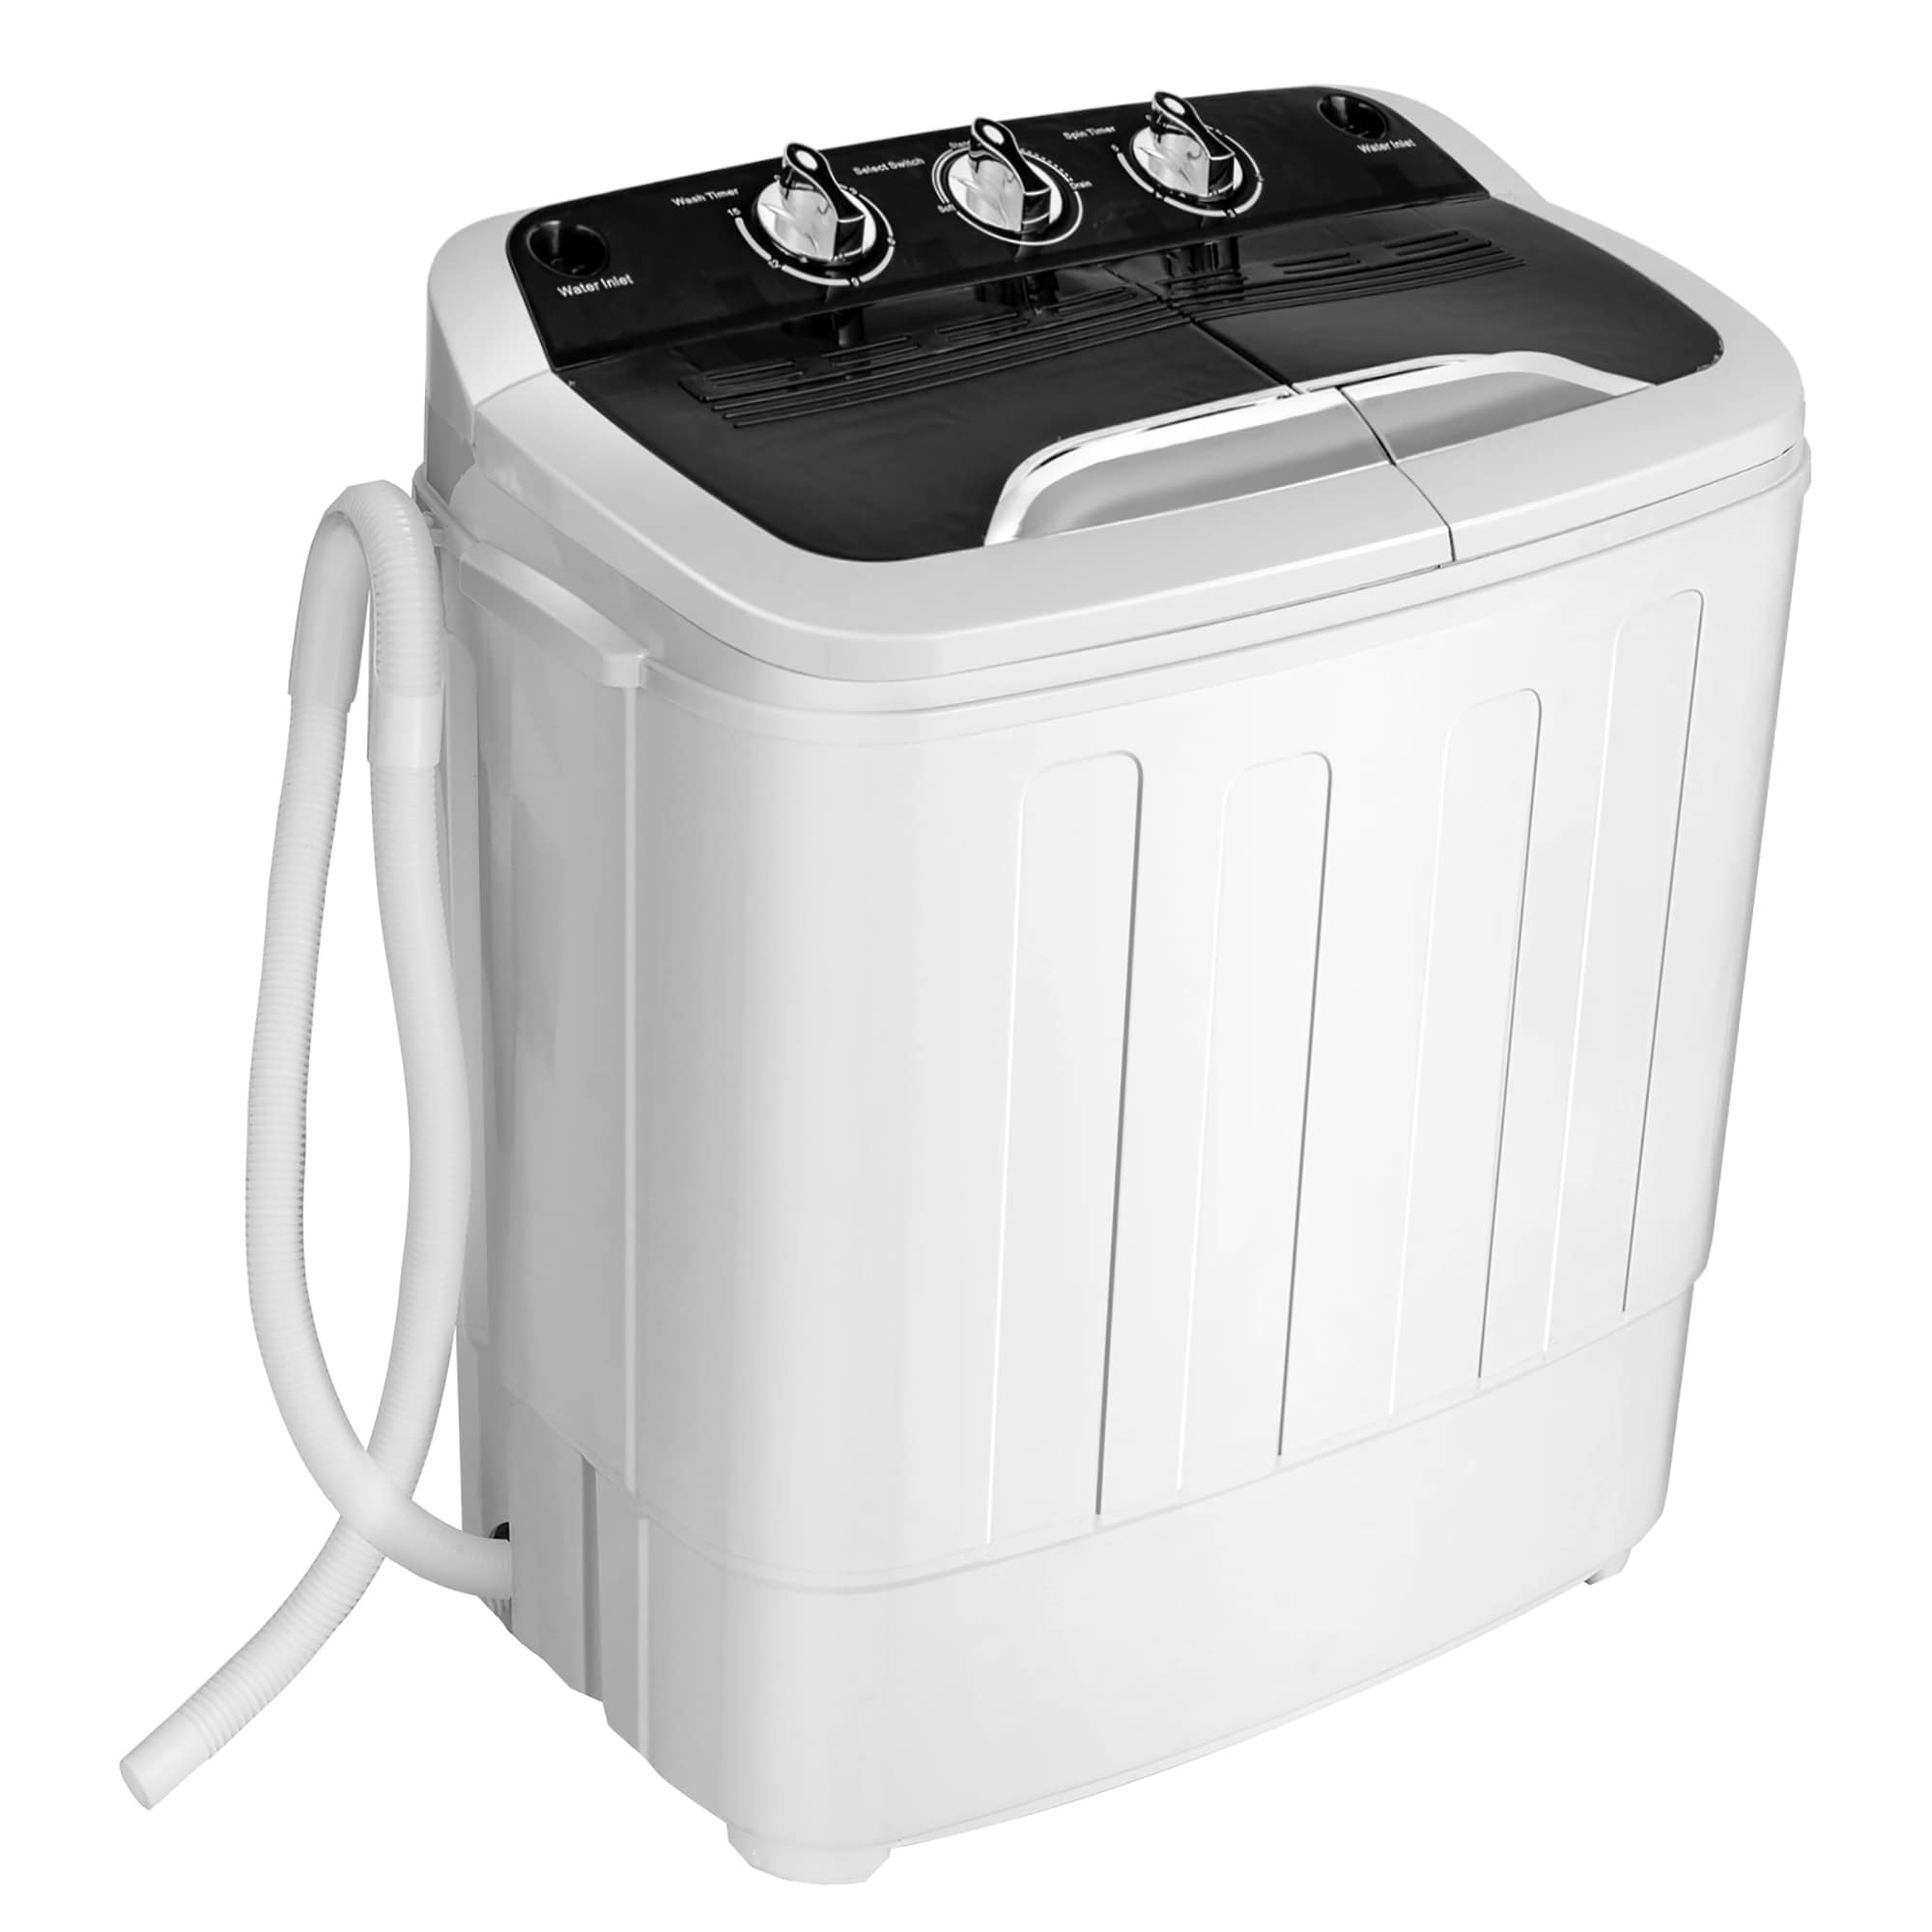 https://ak1.ostkcdn.com/images/products/is/images/direct/396d2395f6ff4a7f8c276be419ce8ec5b706bdf1/Costway-13lbs-Portable-Semi-Automatic-Twin-Tub-Wash-Machine-W-.jpg